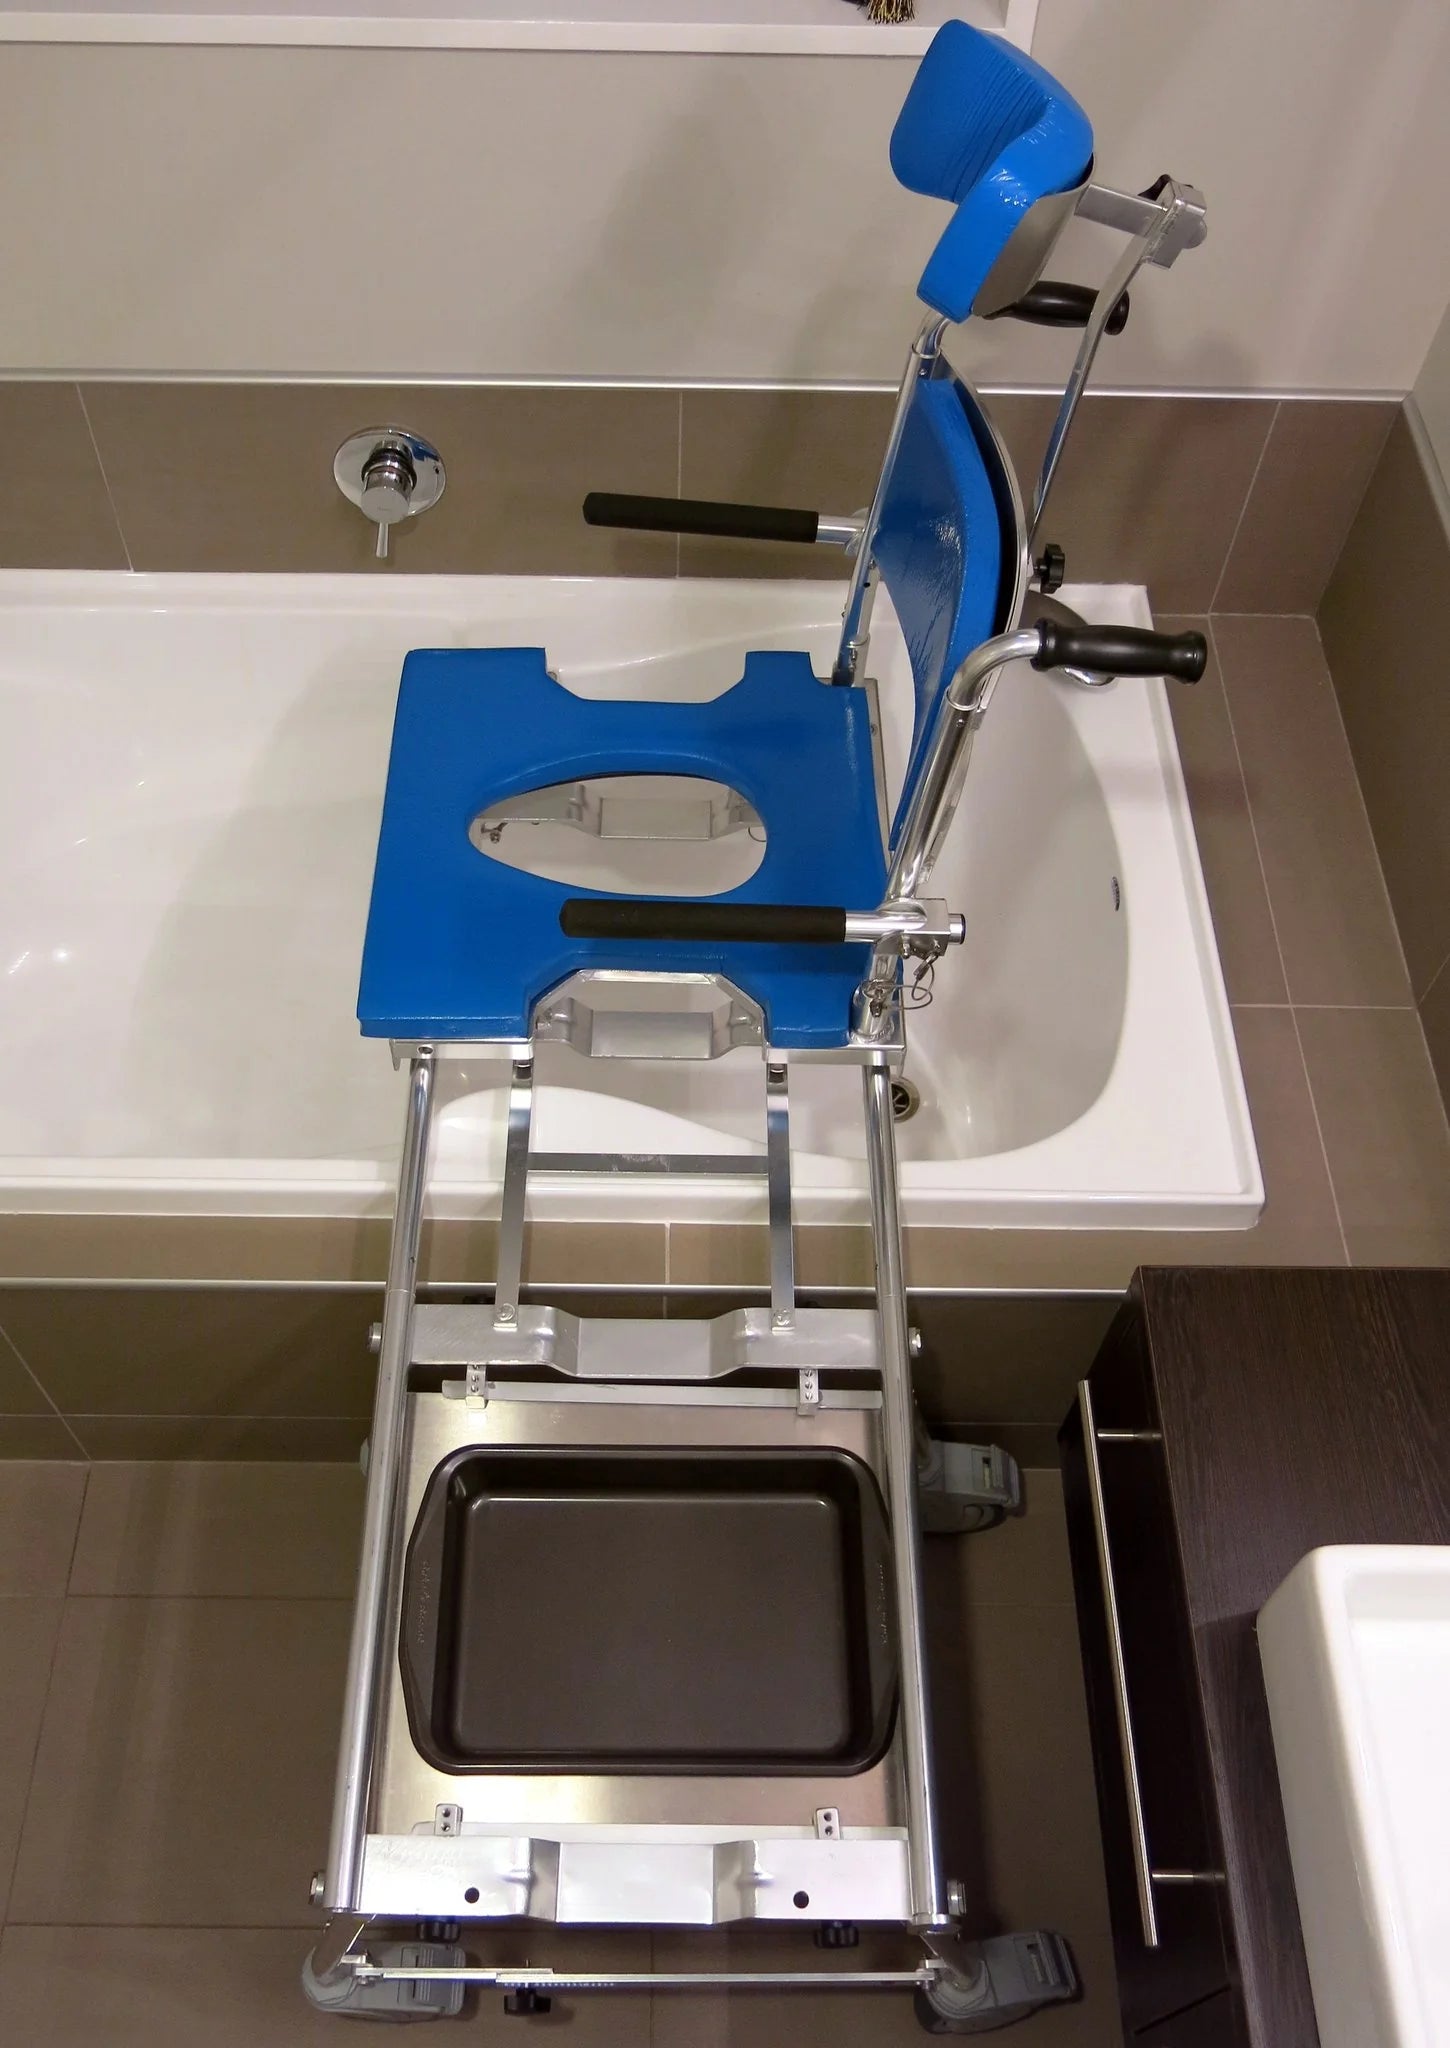 GO-ANYWHERE COMMODE, SHOWER 'N TUB CHAIR (CST)